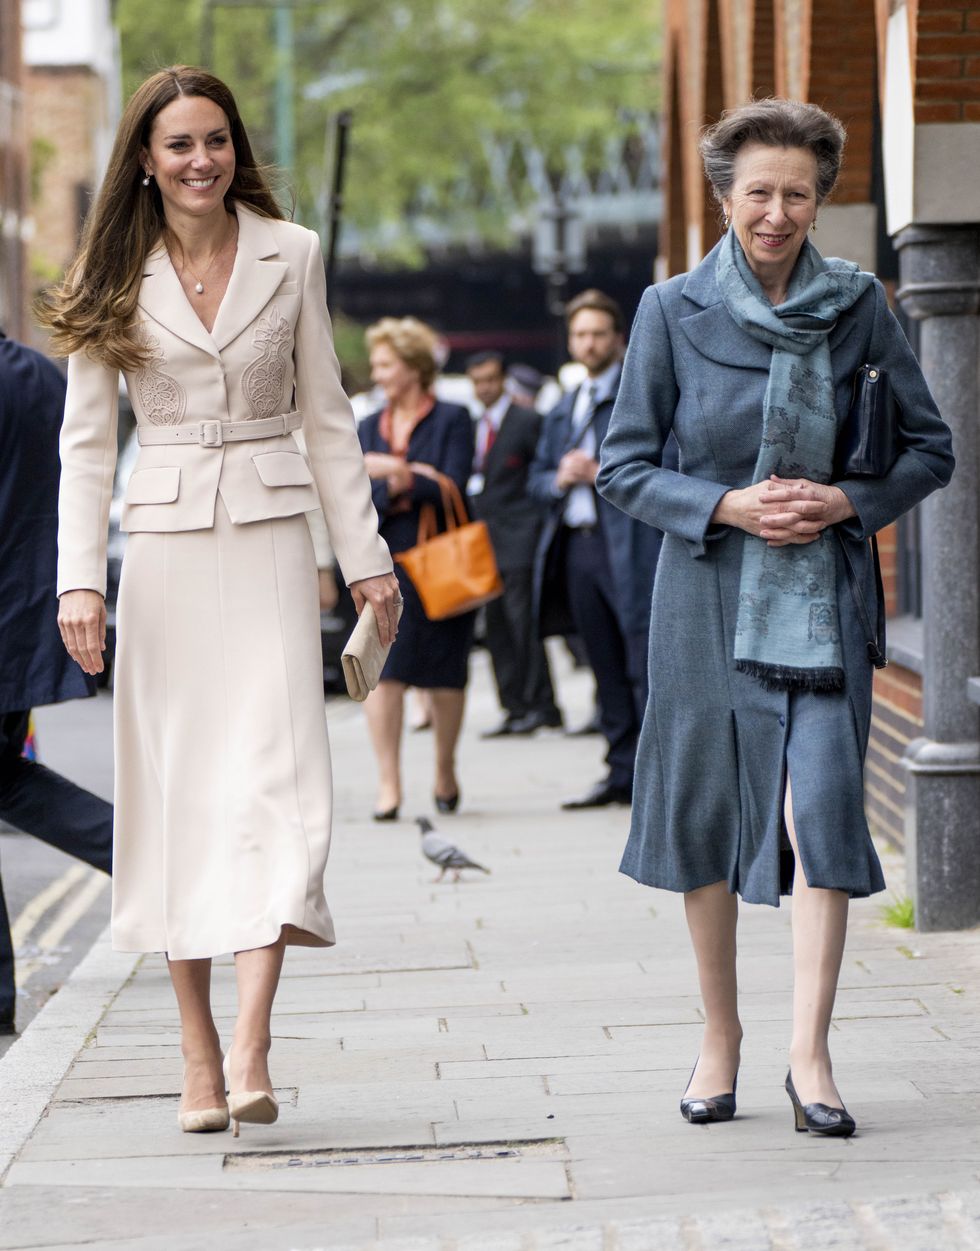 london, england   april 27 princess anne, princess royal, patron, the royal college of midwives rcm, and catherine, duchess of cambridge, patron, the royal college of obstetricians and gynaecologists rcog, visit the rcm and rcogs headquarters on april 27, 2022 in london, england photo by mark cuthbertgetty images